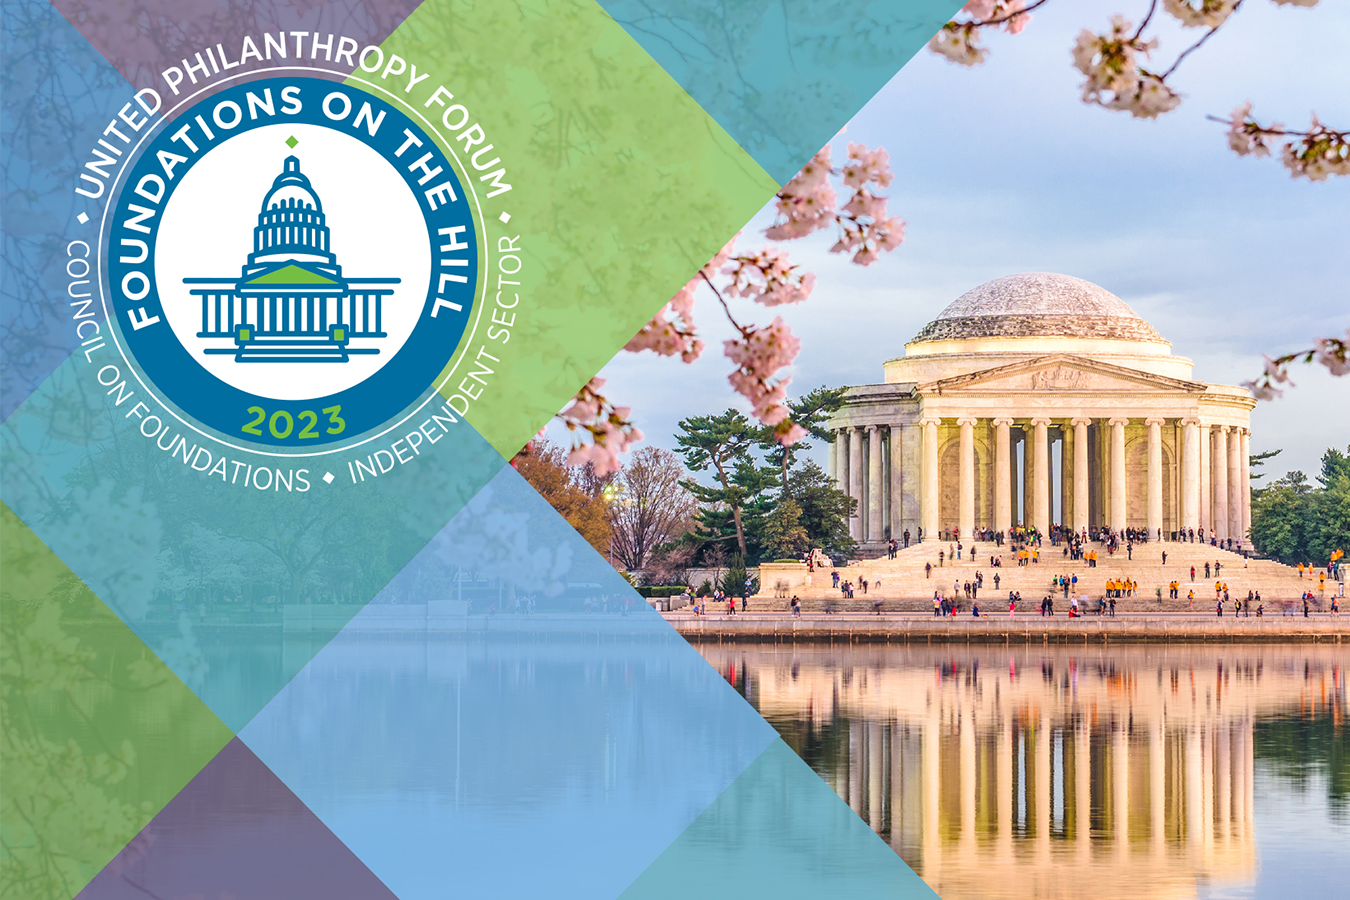 An image of the Thomas Jefferson Memorial in Washington D.C. overlaid by green, blue and purple boxes on the left side and the Foundations on the Hill 2023 logo.